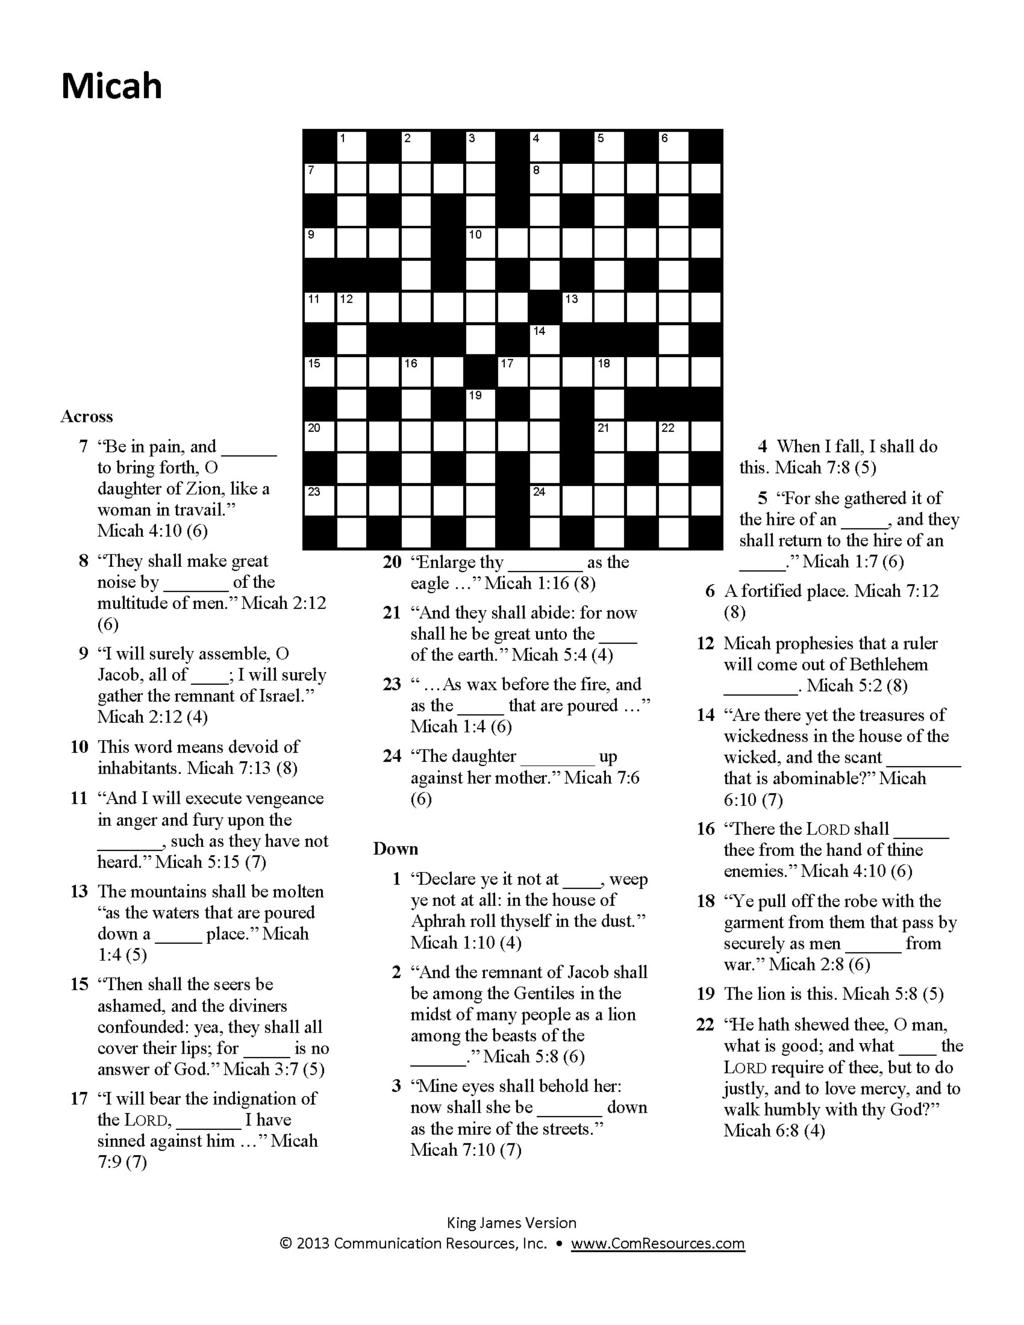 page 8 Bible Crossword